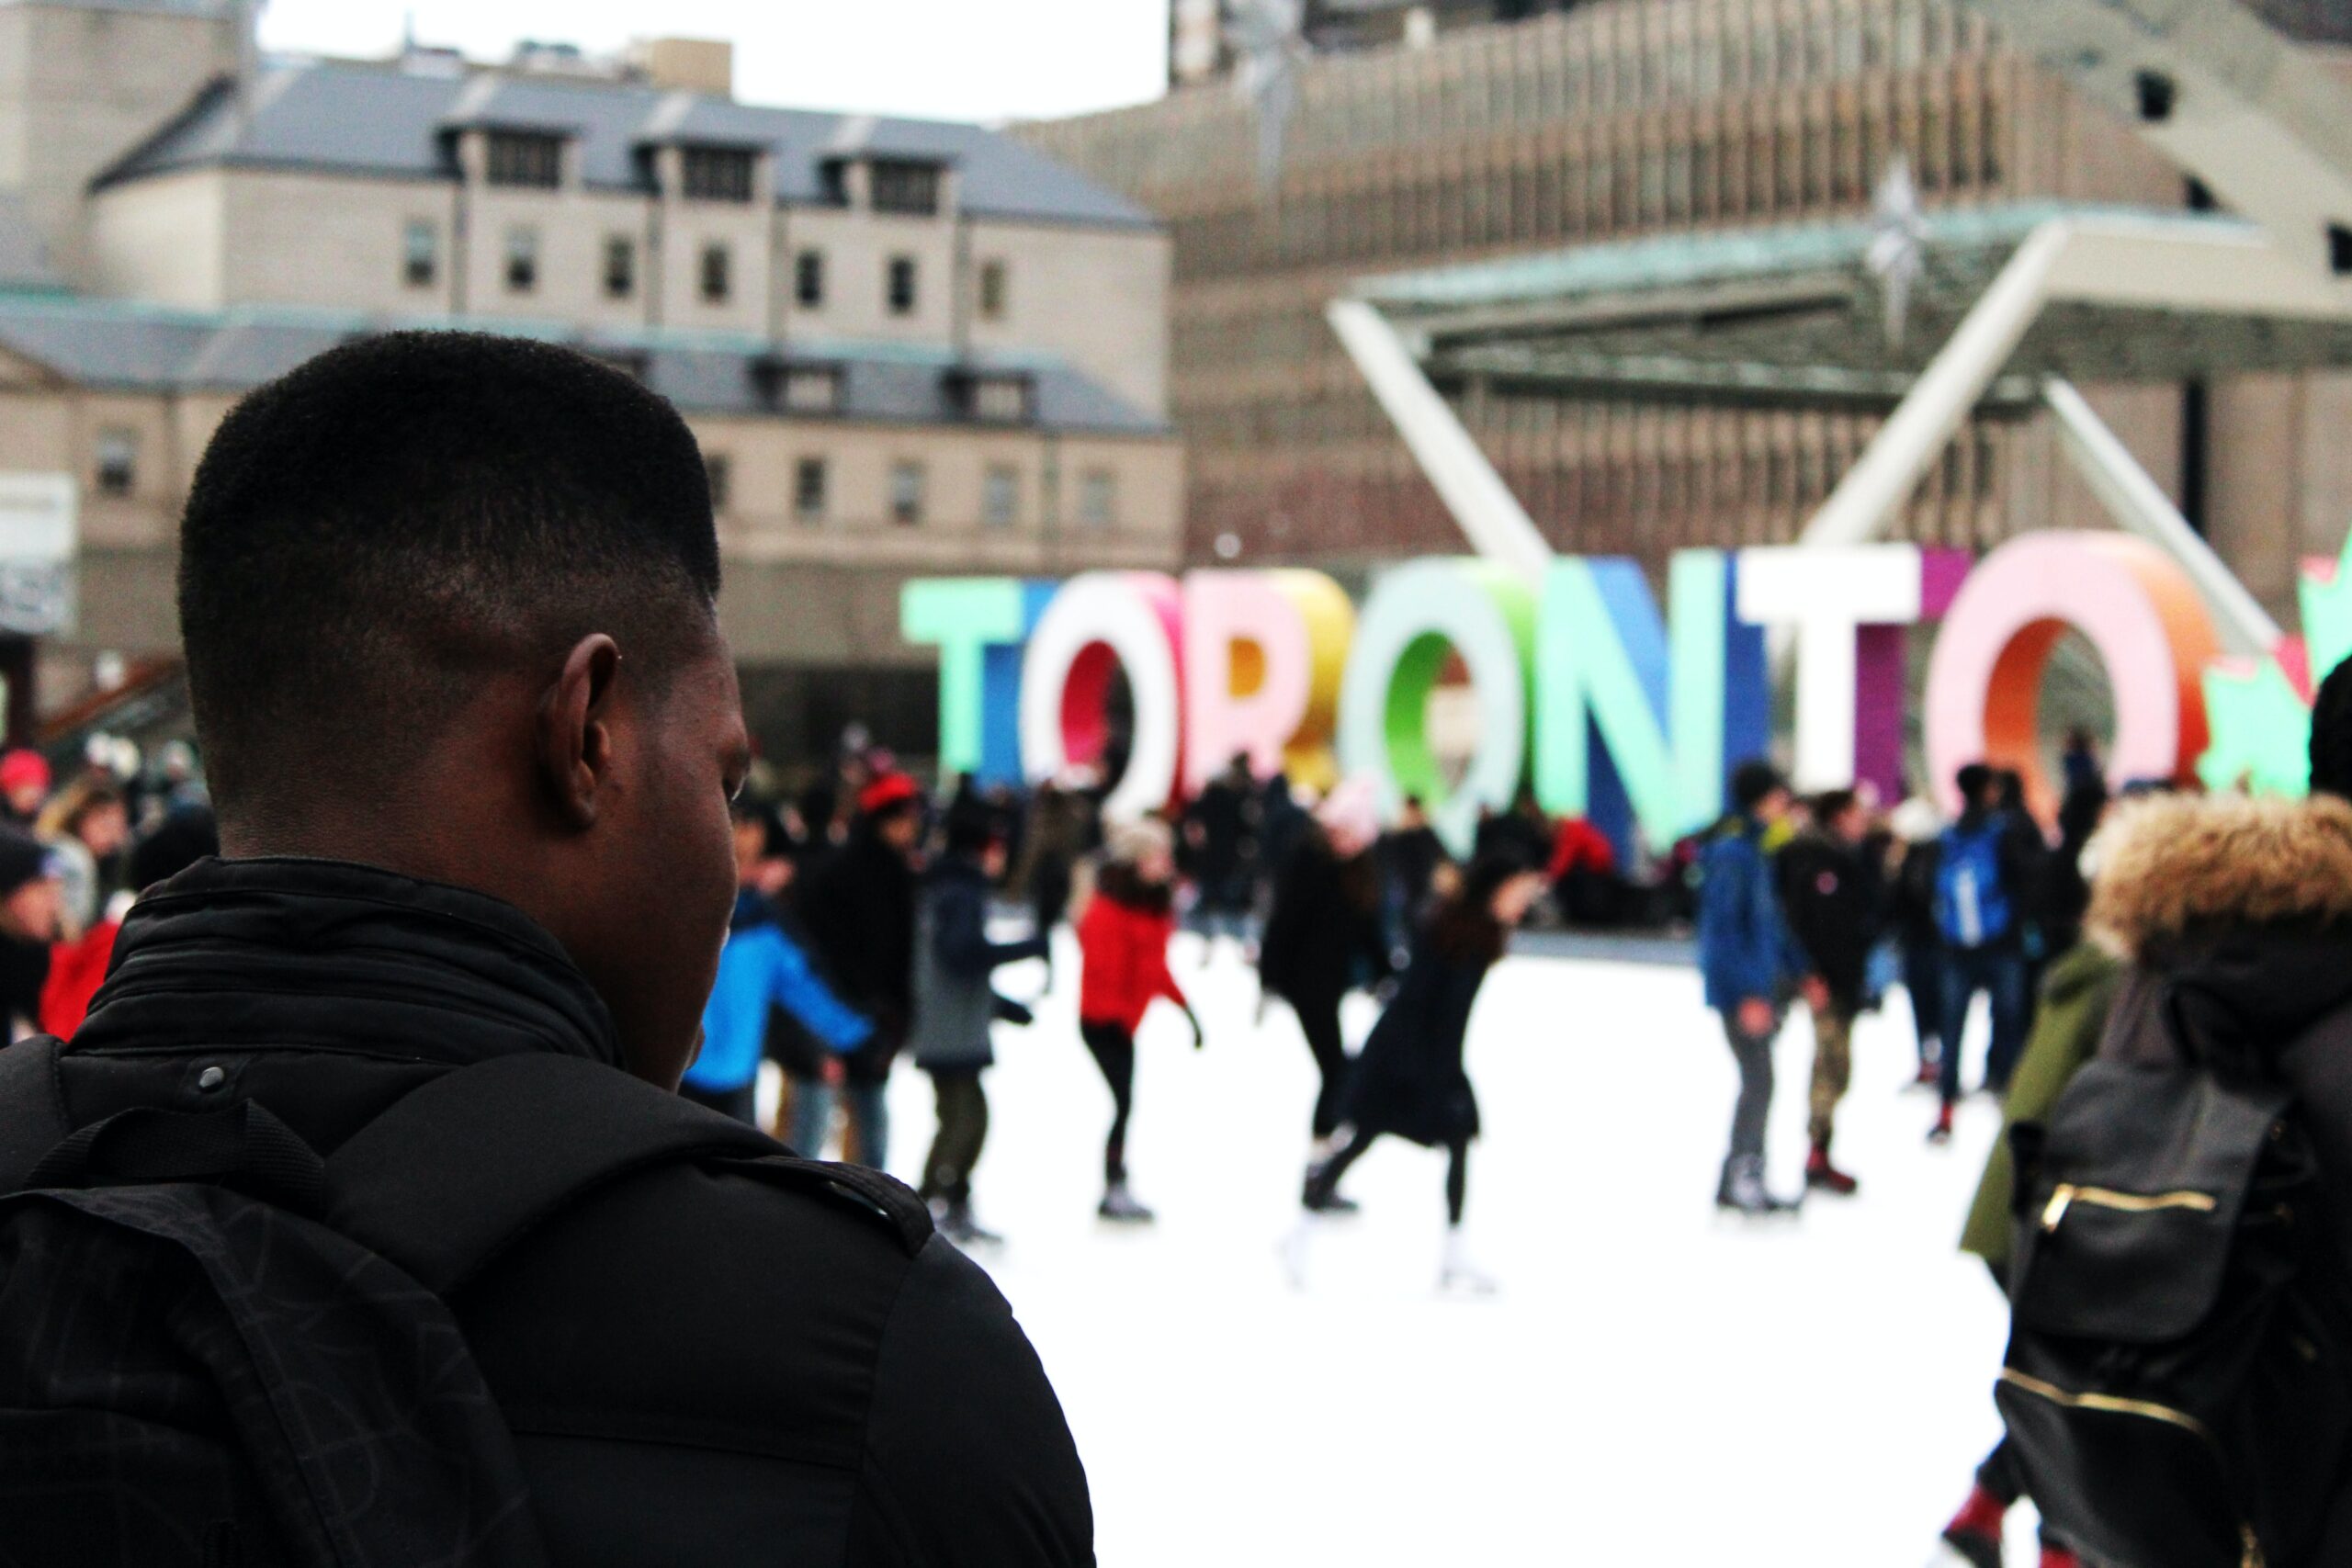 Racialized minorities in Peel voice COVID-19 experiences in new anti-racism project